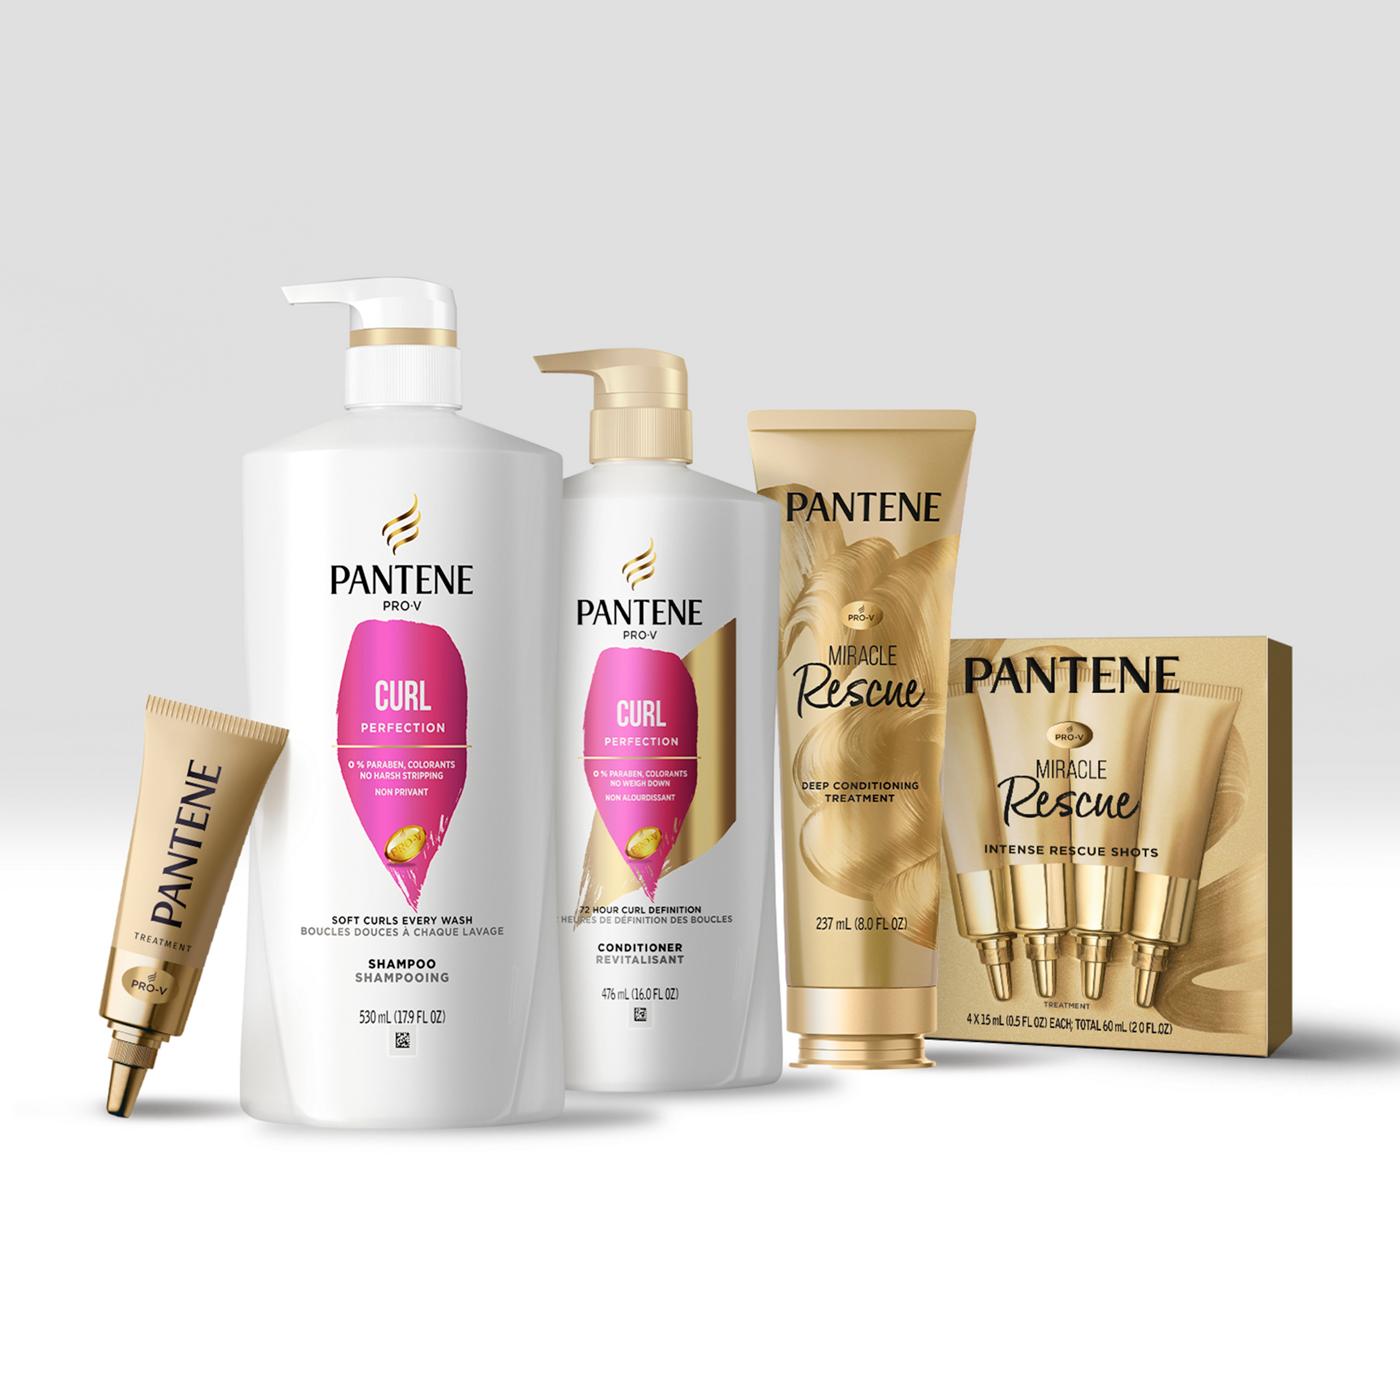 Pantene PRO-V Curl Perfection Conditioner; image 2 of 10